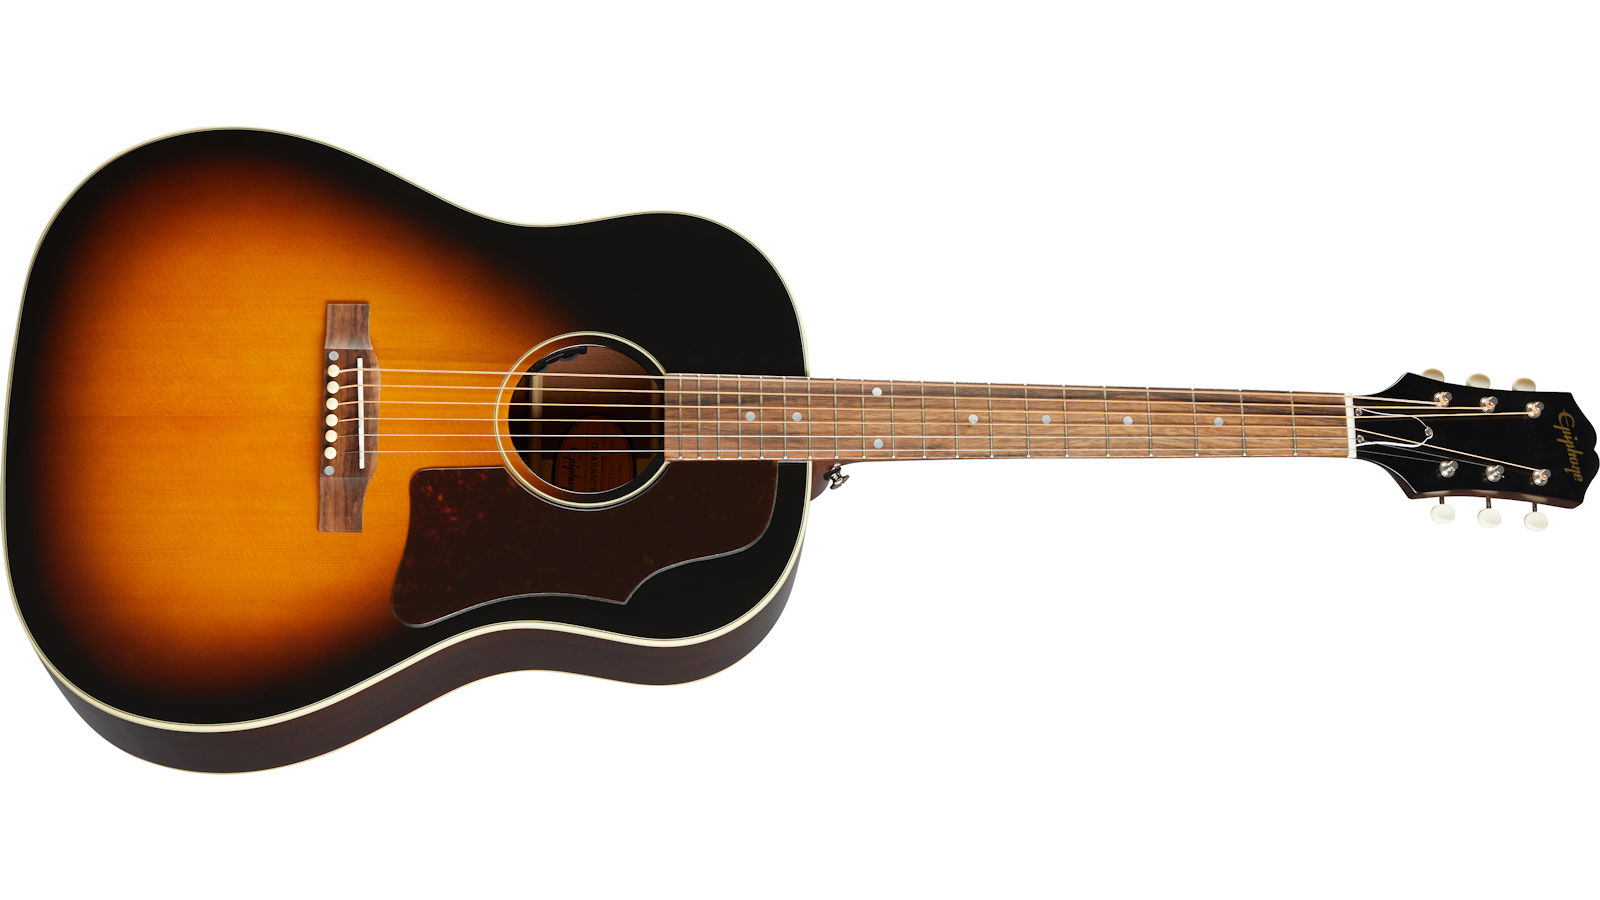 Epiphone Inspired By Gibson...